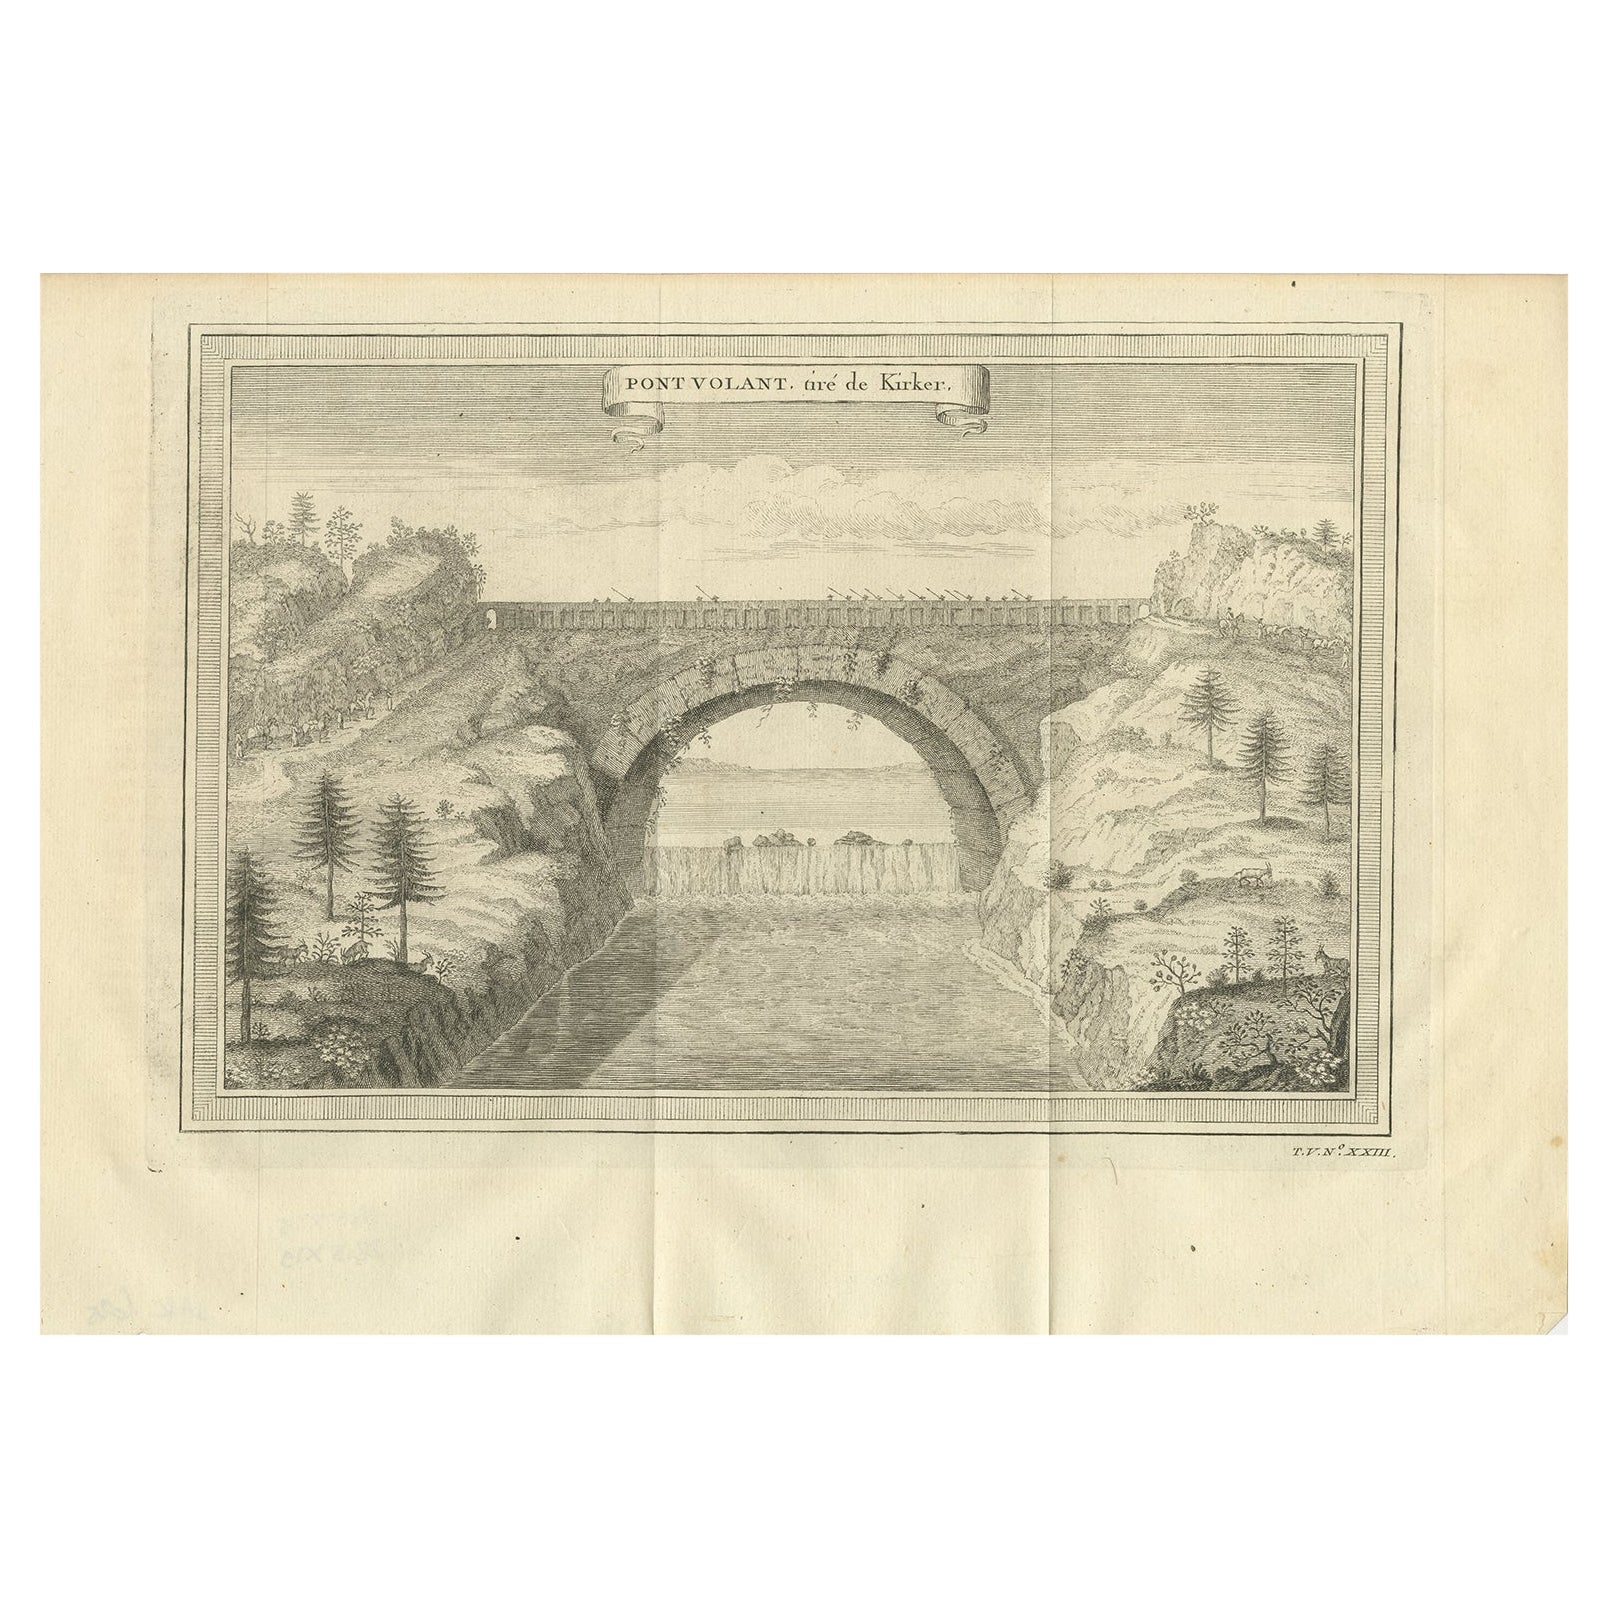 Antique Print of the Flying Bridge in China, 1746